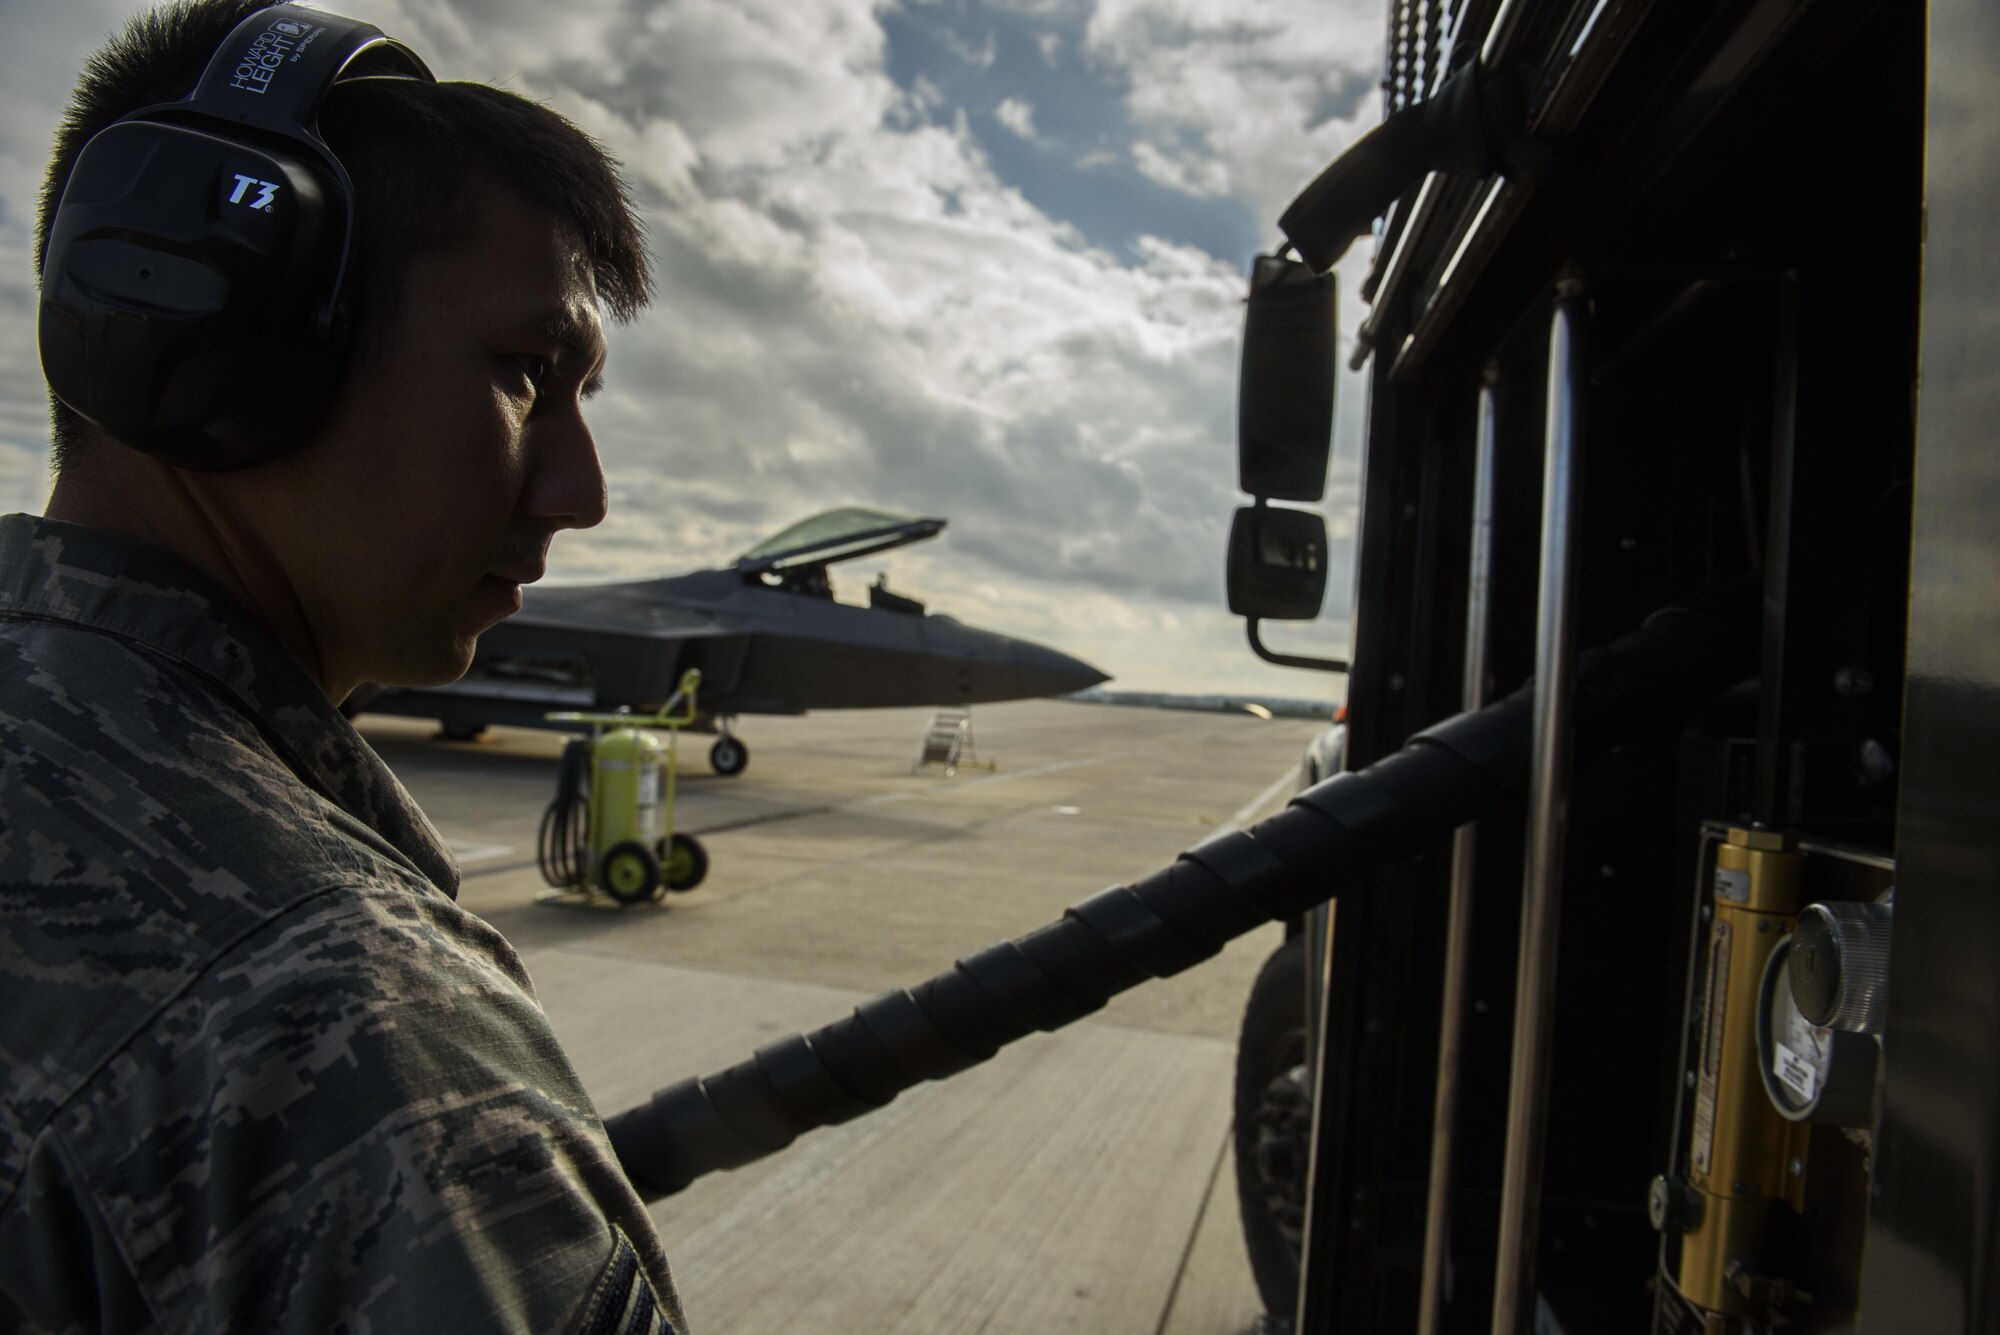 Senior Airman Josh Kampa, 52nd Logistic Readiness Squadron fuels distribution operator, refuels an F-22 Raptor assigned to the 1st Fighter Wing, Joint Base Langley-Eustis, Va., at Spangdahlem Air Base, Germany, Oct. 13, 2017.